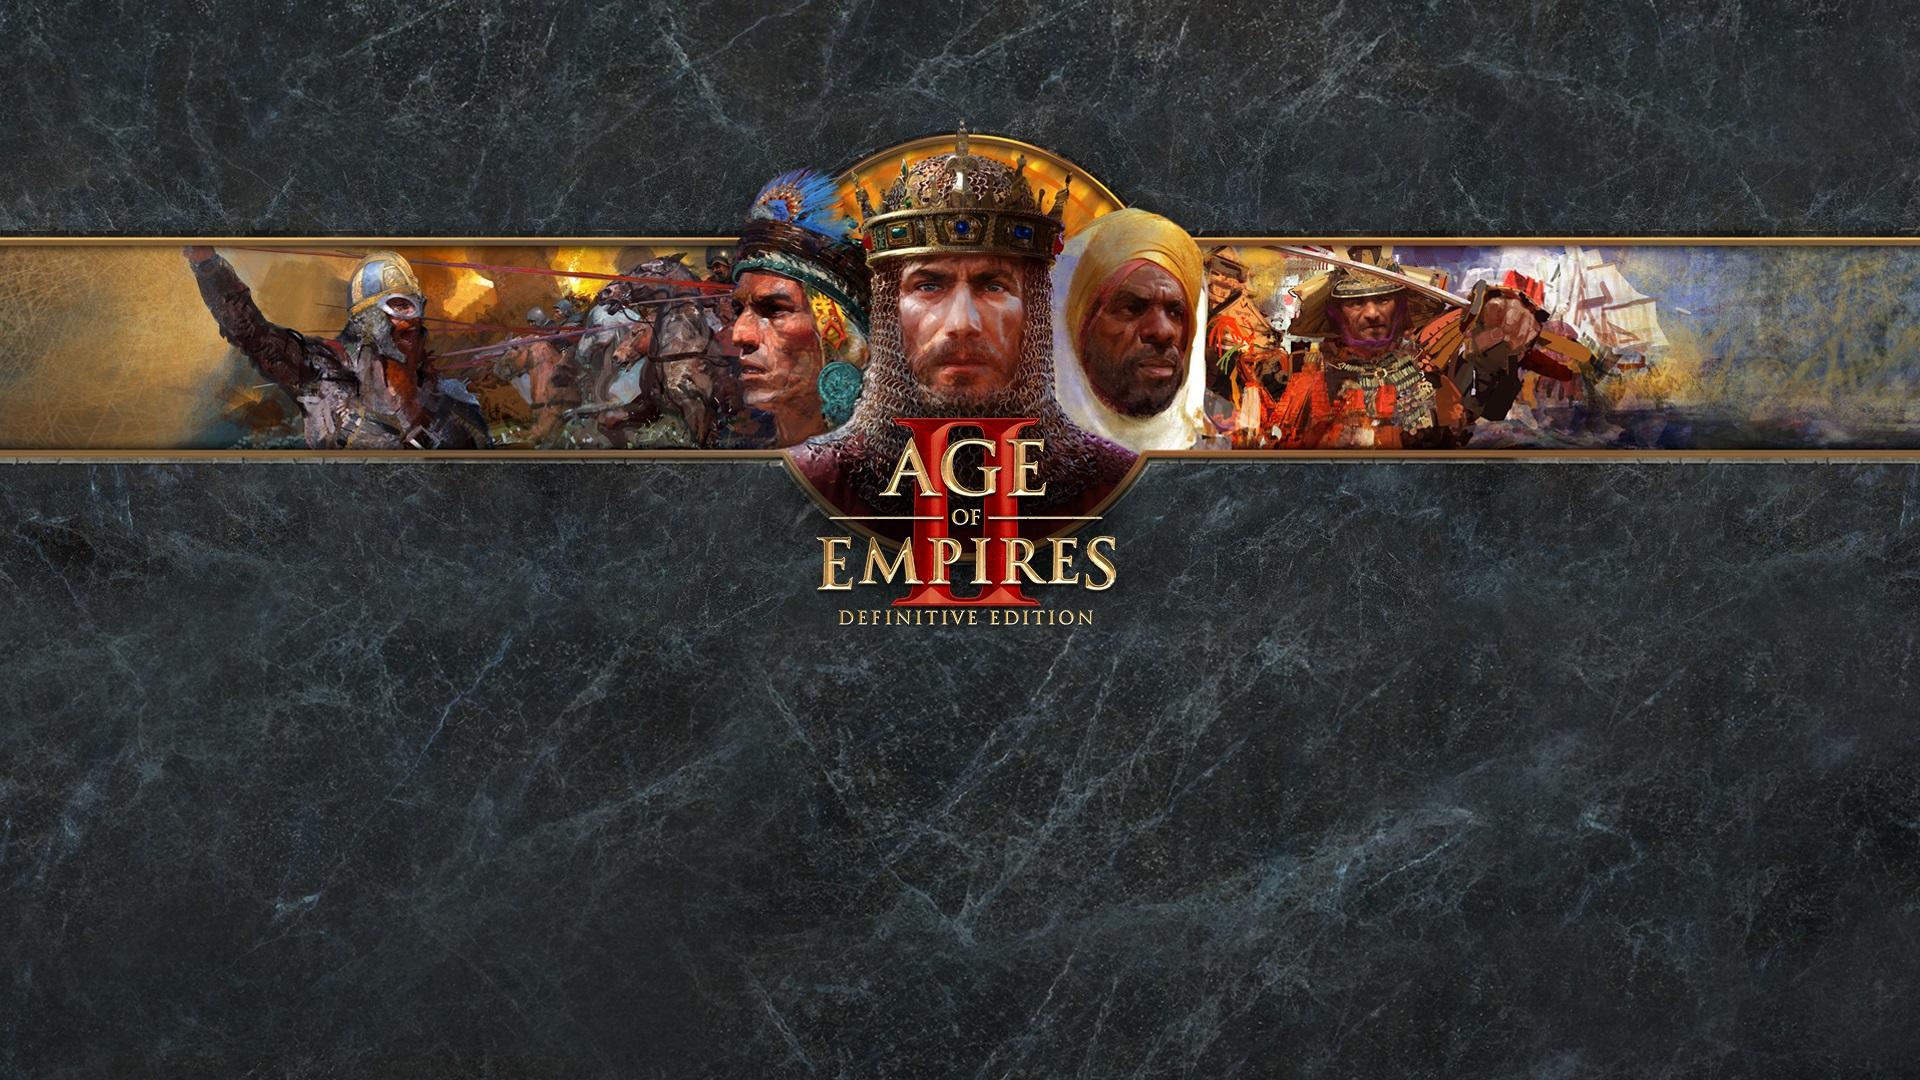 You Can Now Pre Order 'Age Of Empires II: Definitive Edition